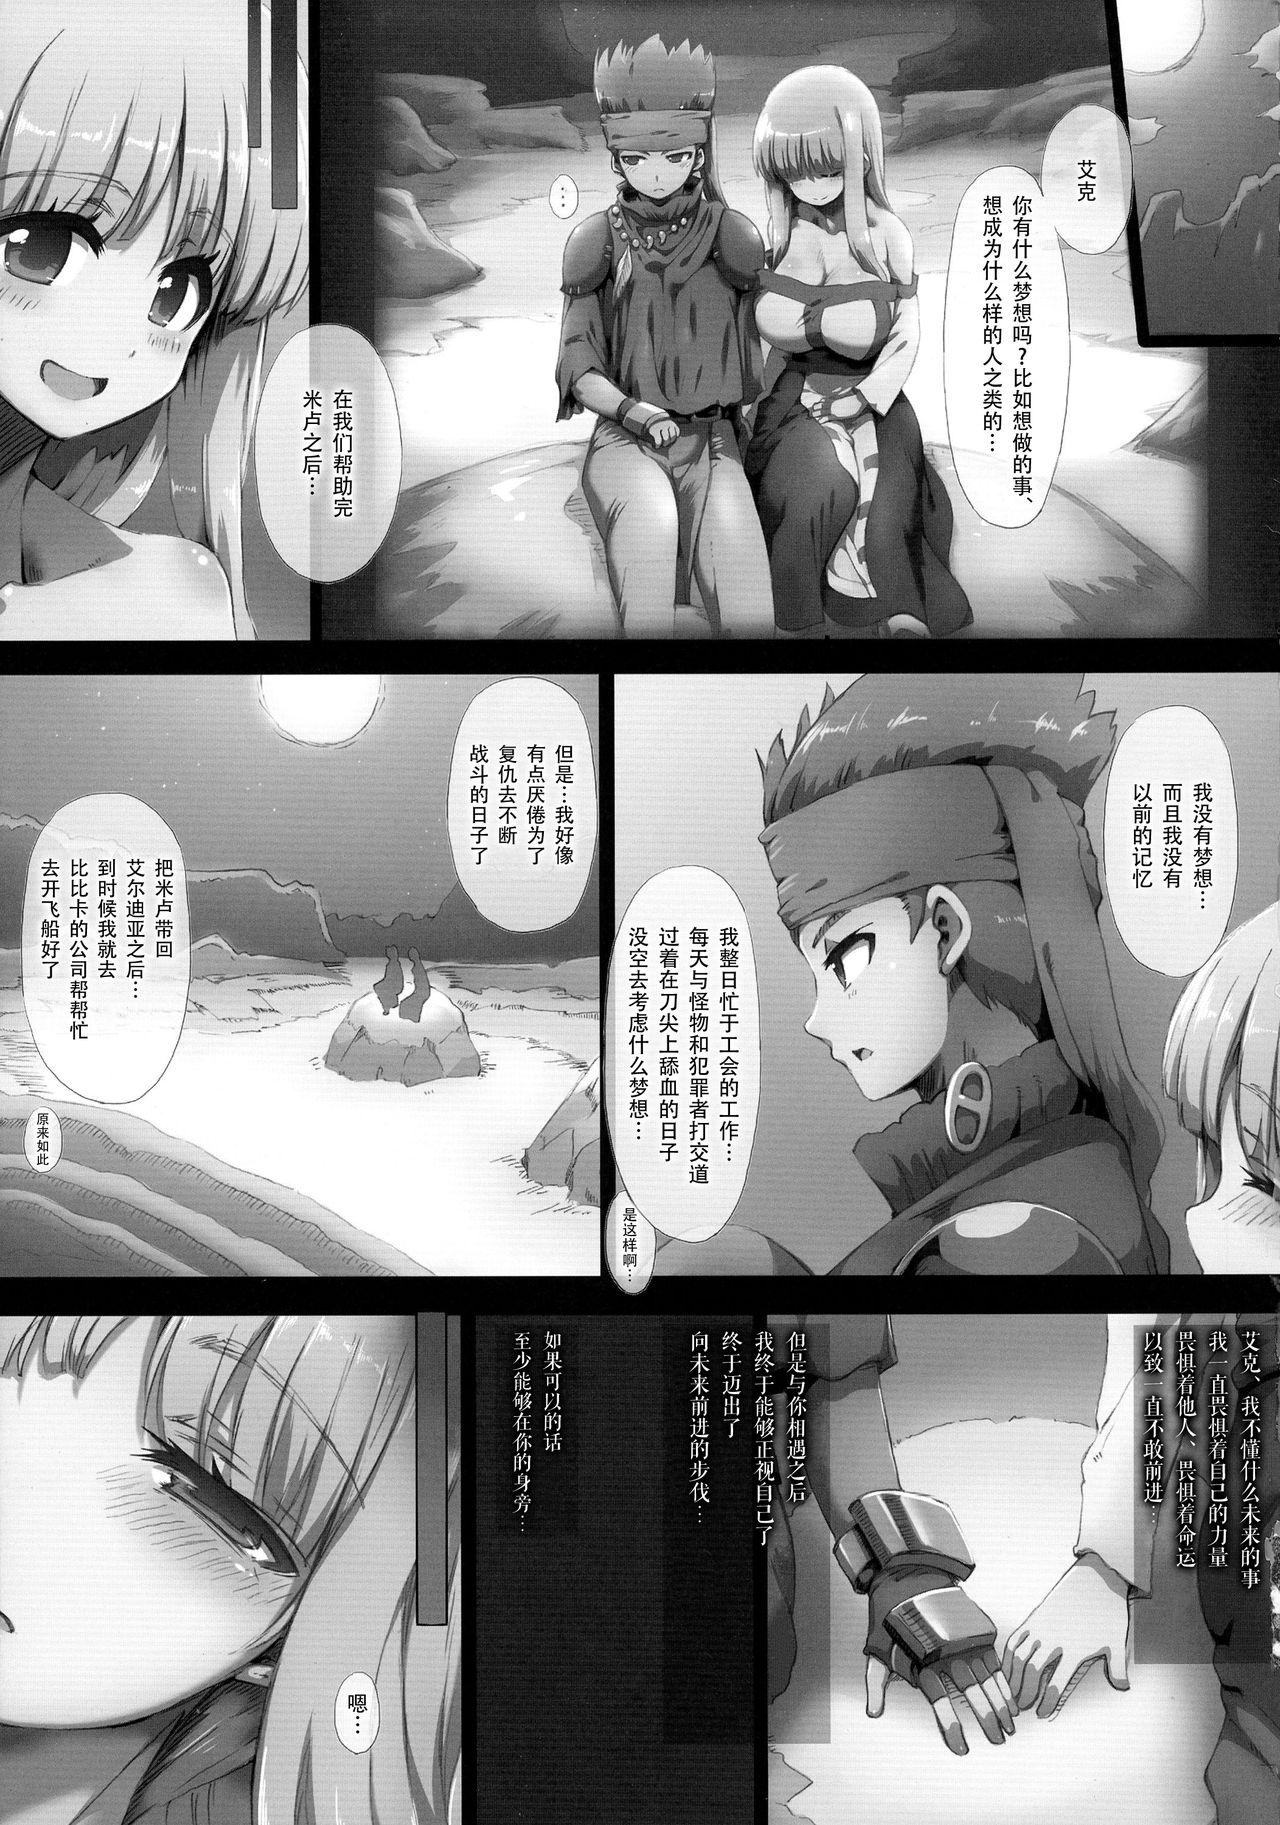 Toes [GREAT Acta (tokyo)] Lieza Origin (Arc The Lad)[Chinese]【不可视汉化】 - Arc the lad Hardcore - Page 6